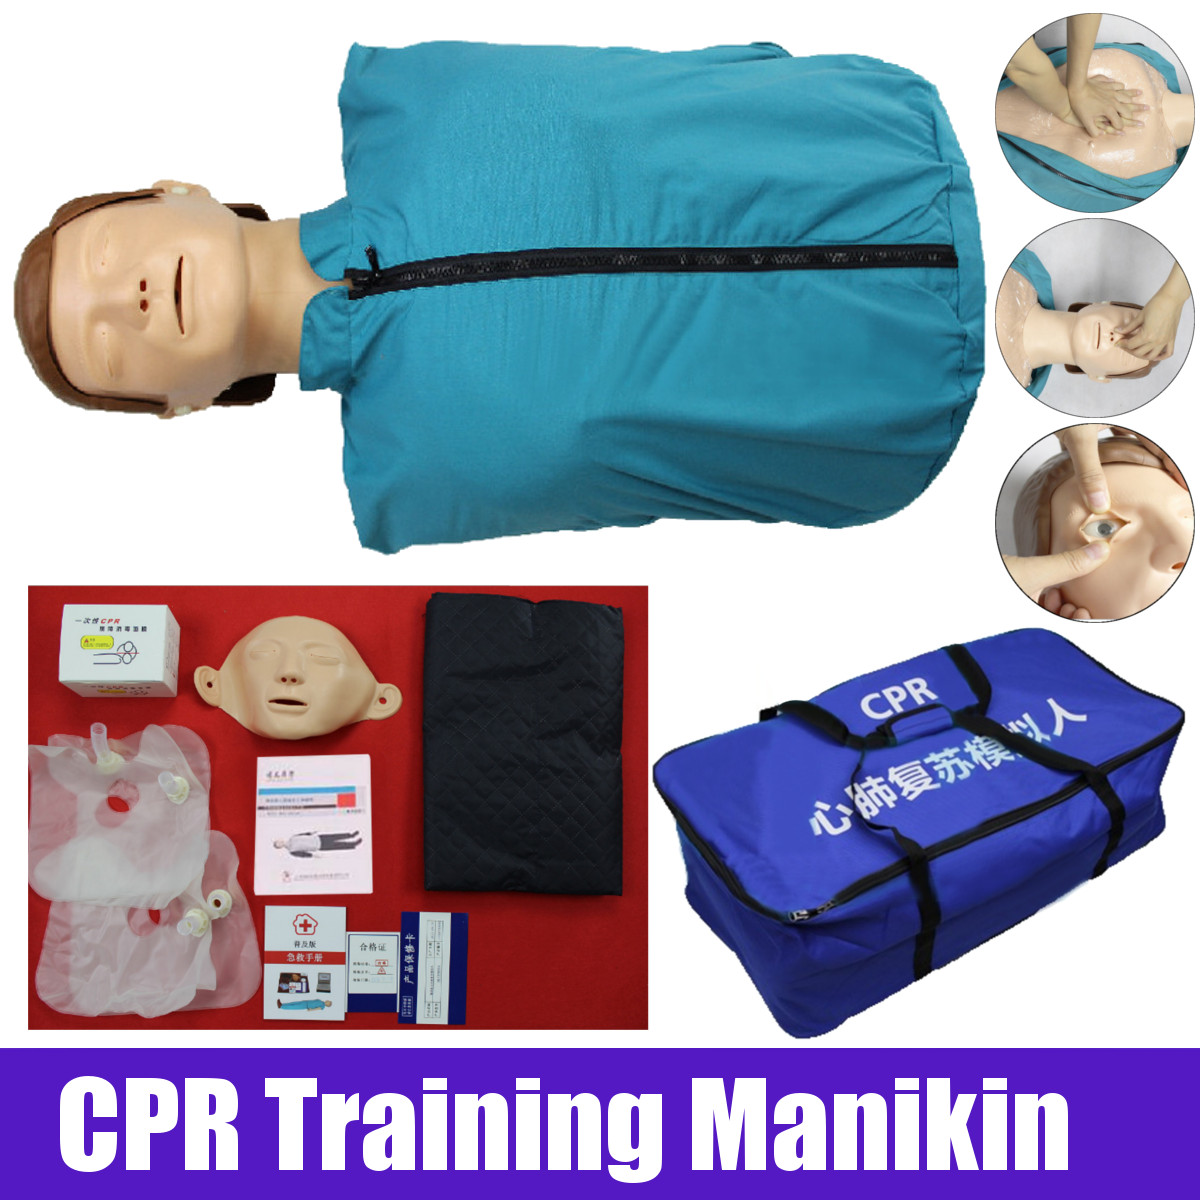 CPR Adult Manikin AED First Aid Training Dummy Training Medical Model Respiration Human 17